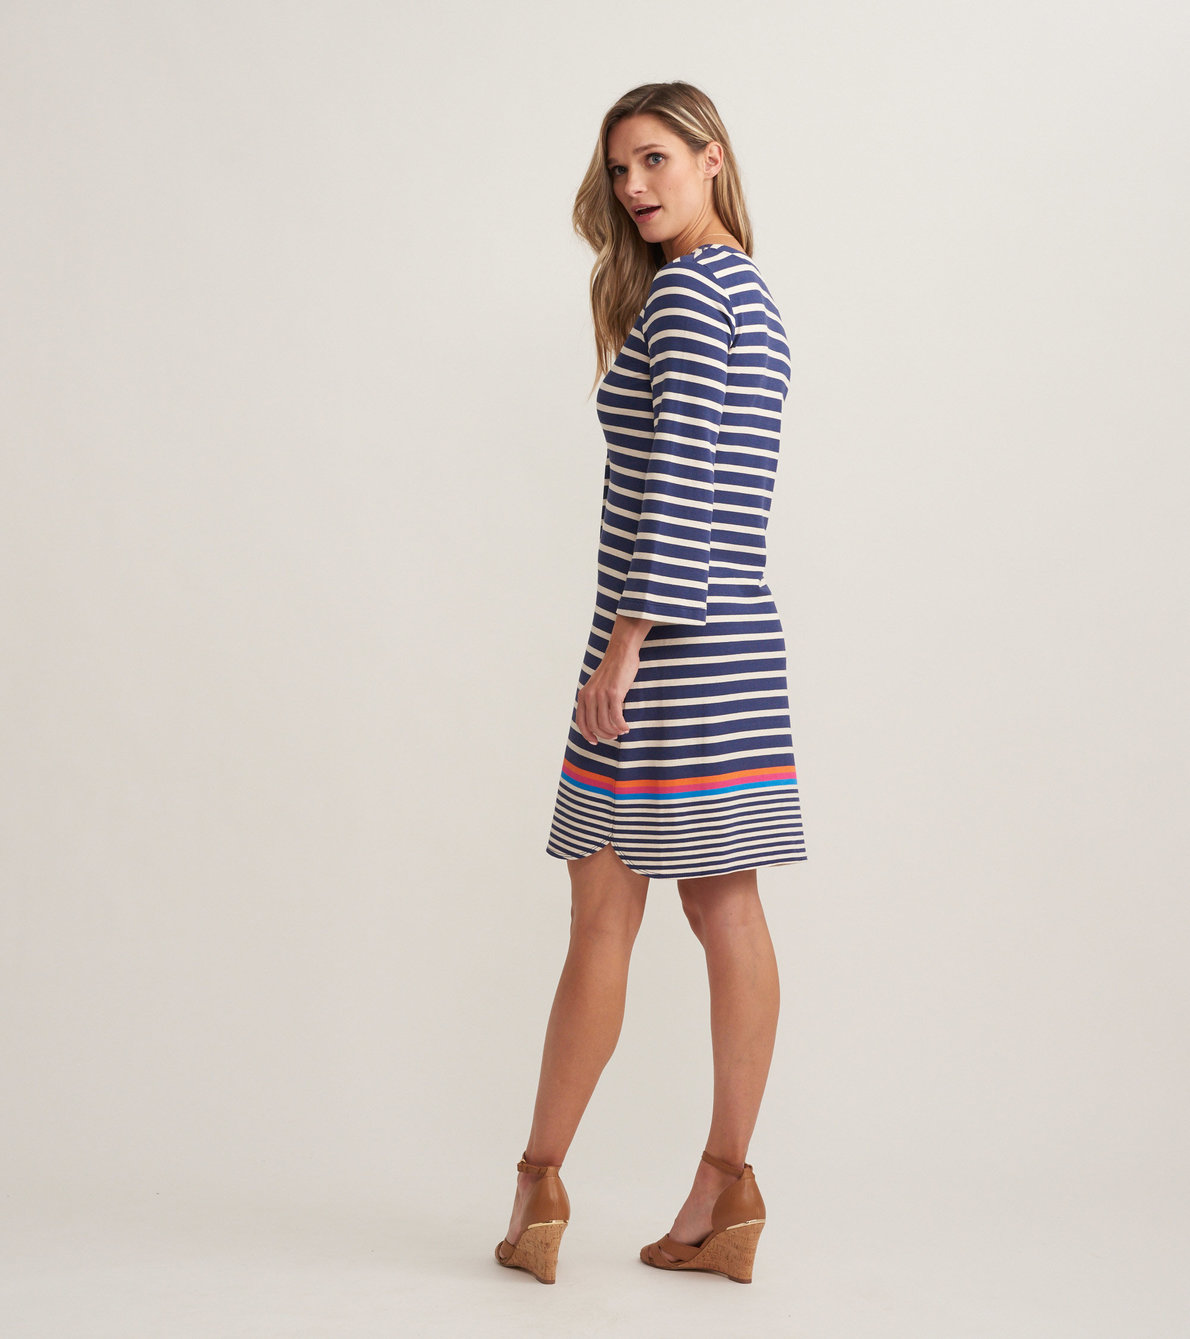 View larger image of Ashley Dress - Navy Stripes